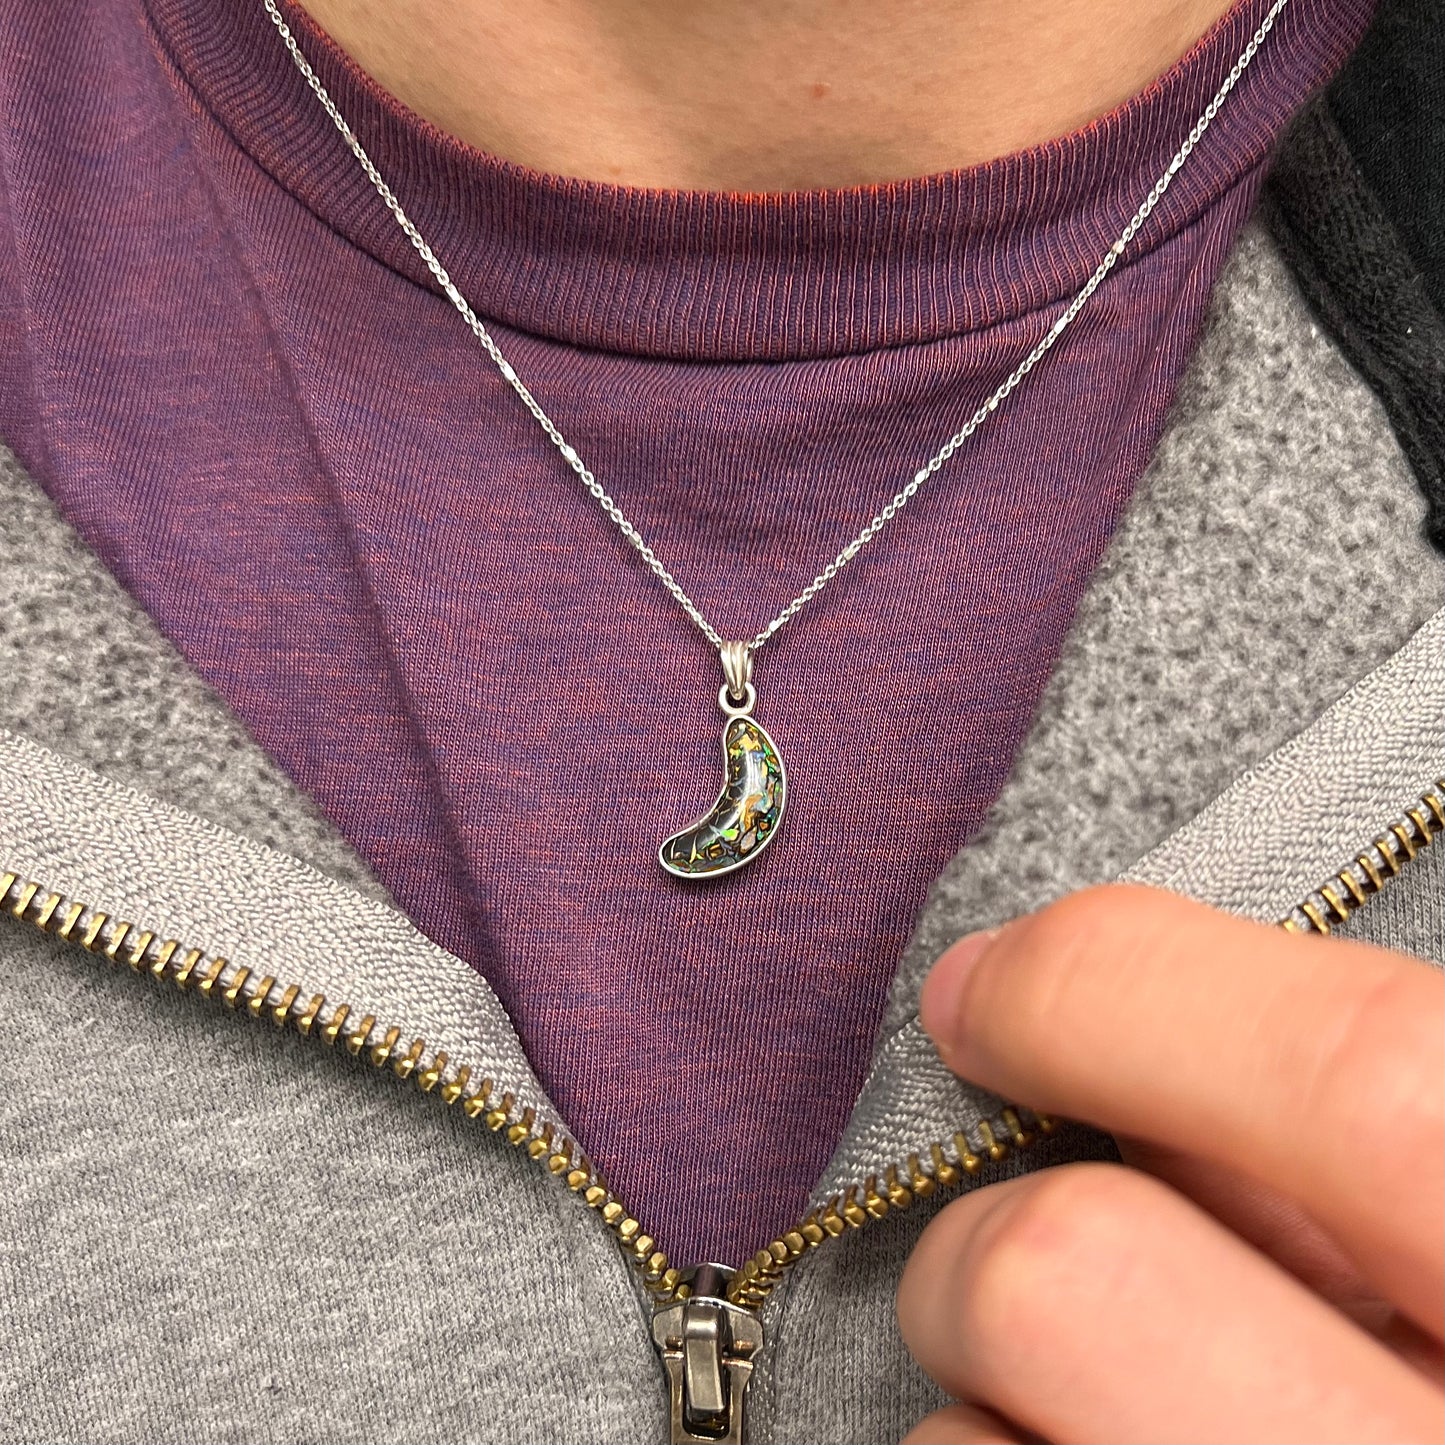 A sterling silver necklace bezel set with a natural Koroit boulder opal stone.  The stone is shaped like a crescent moon.